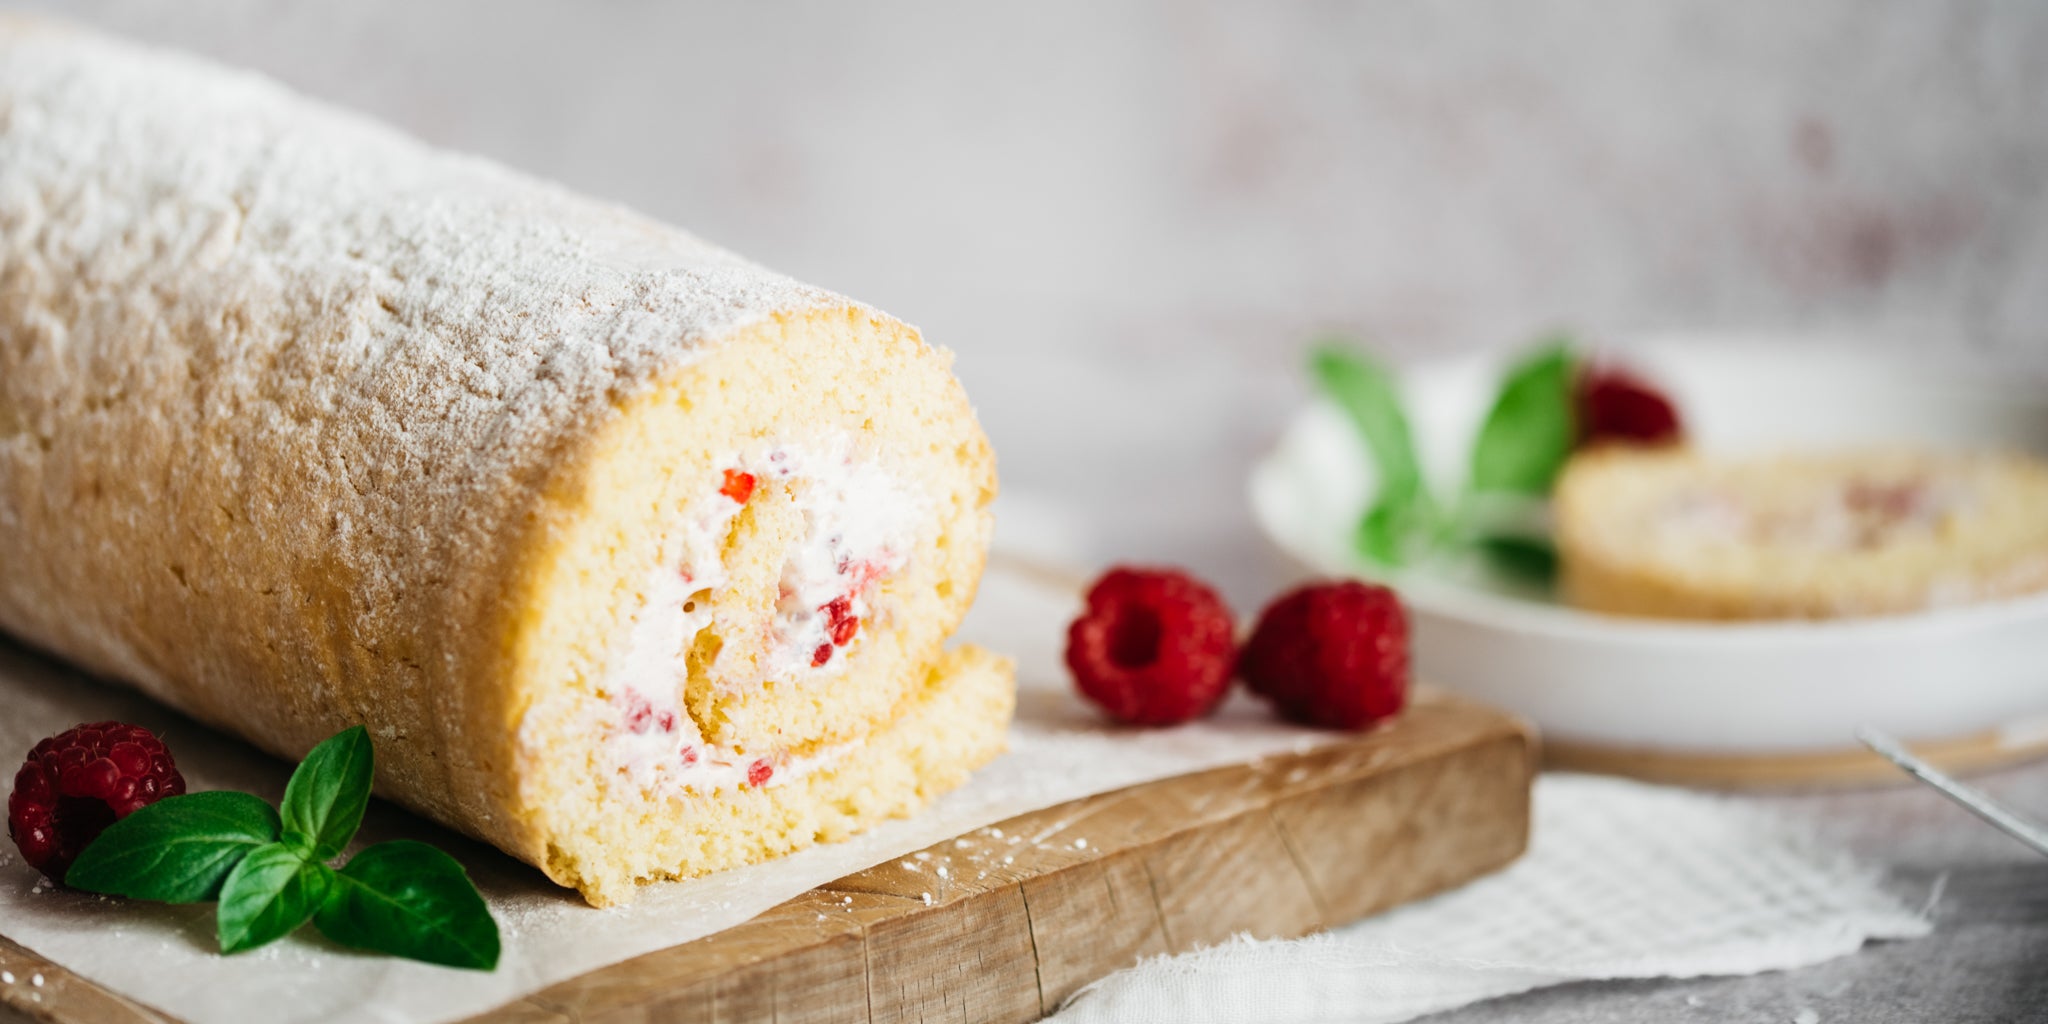 Raspberry roulade on a wooden board surrounded by raspberries